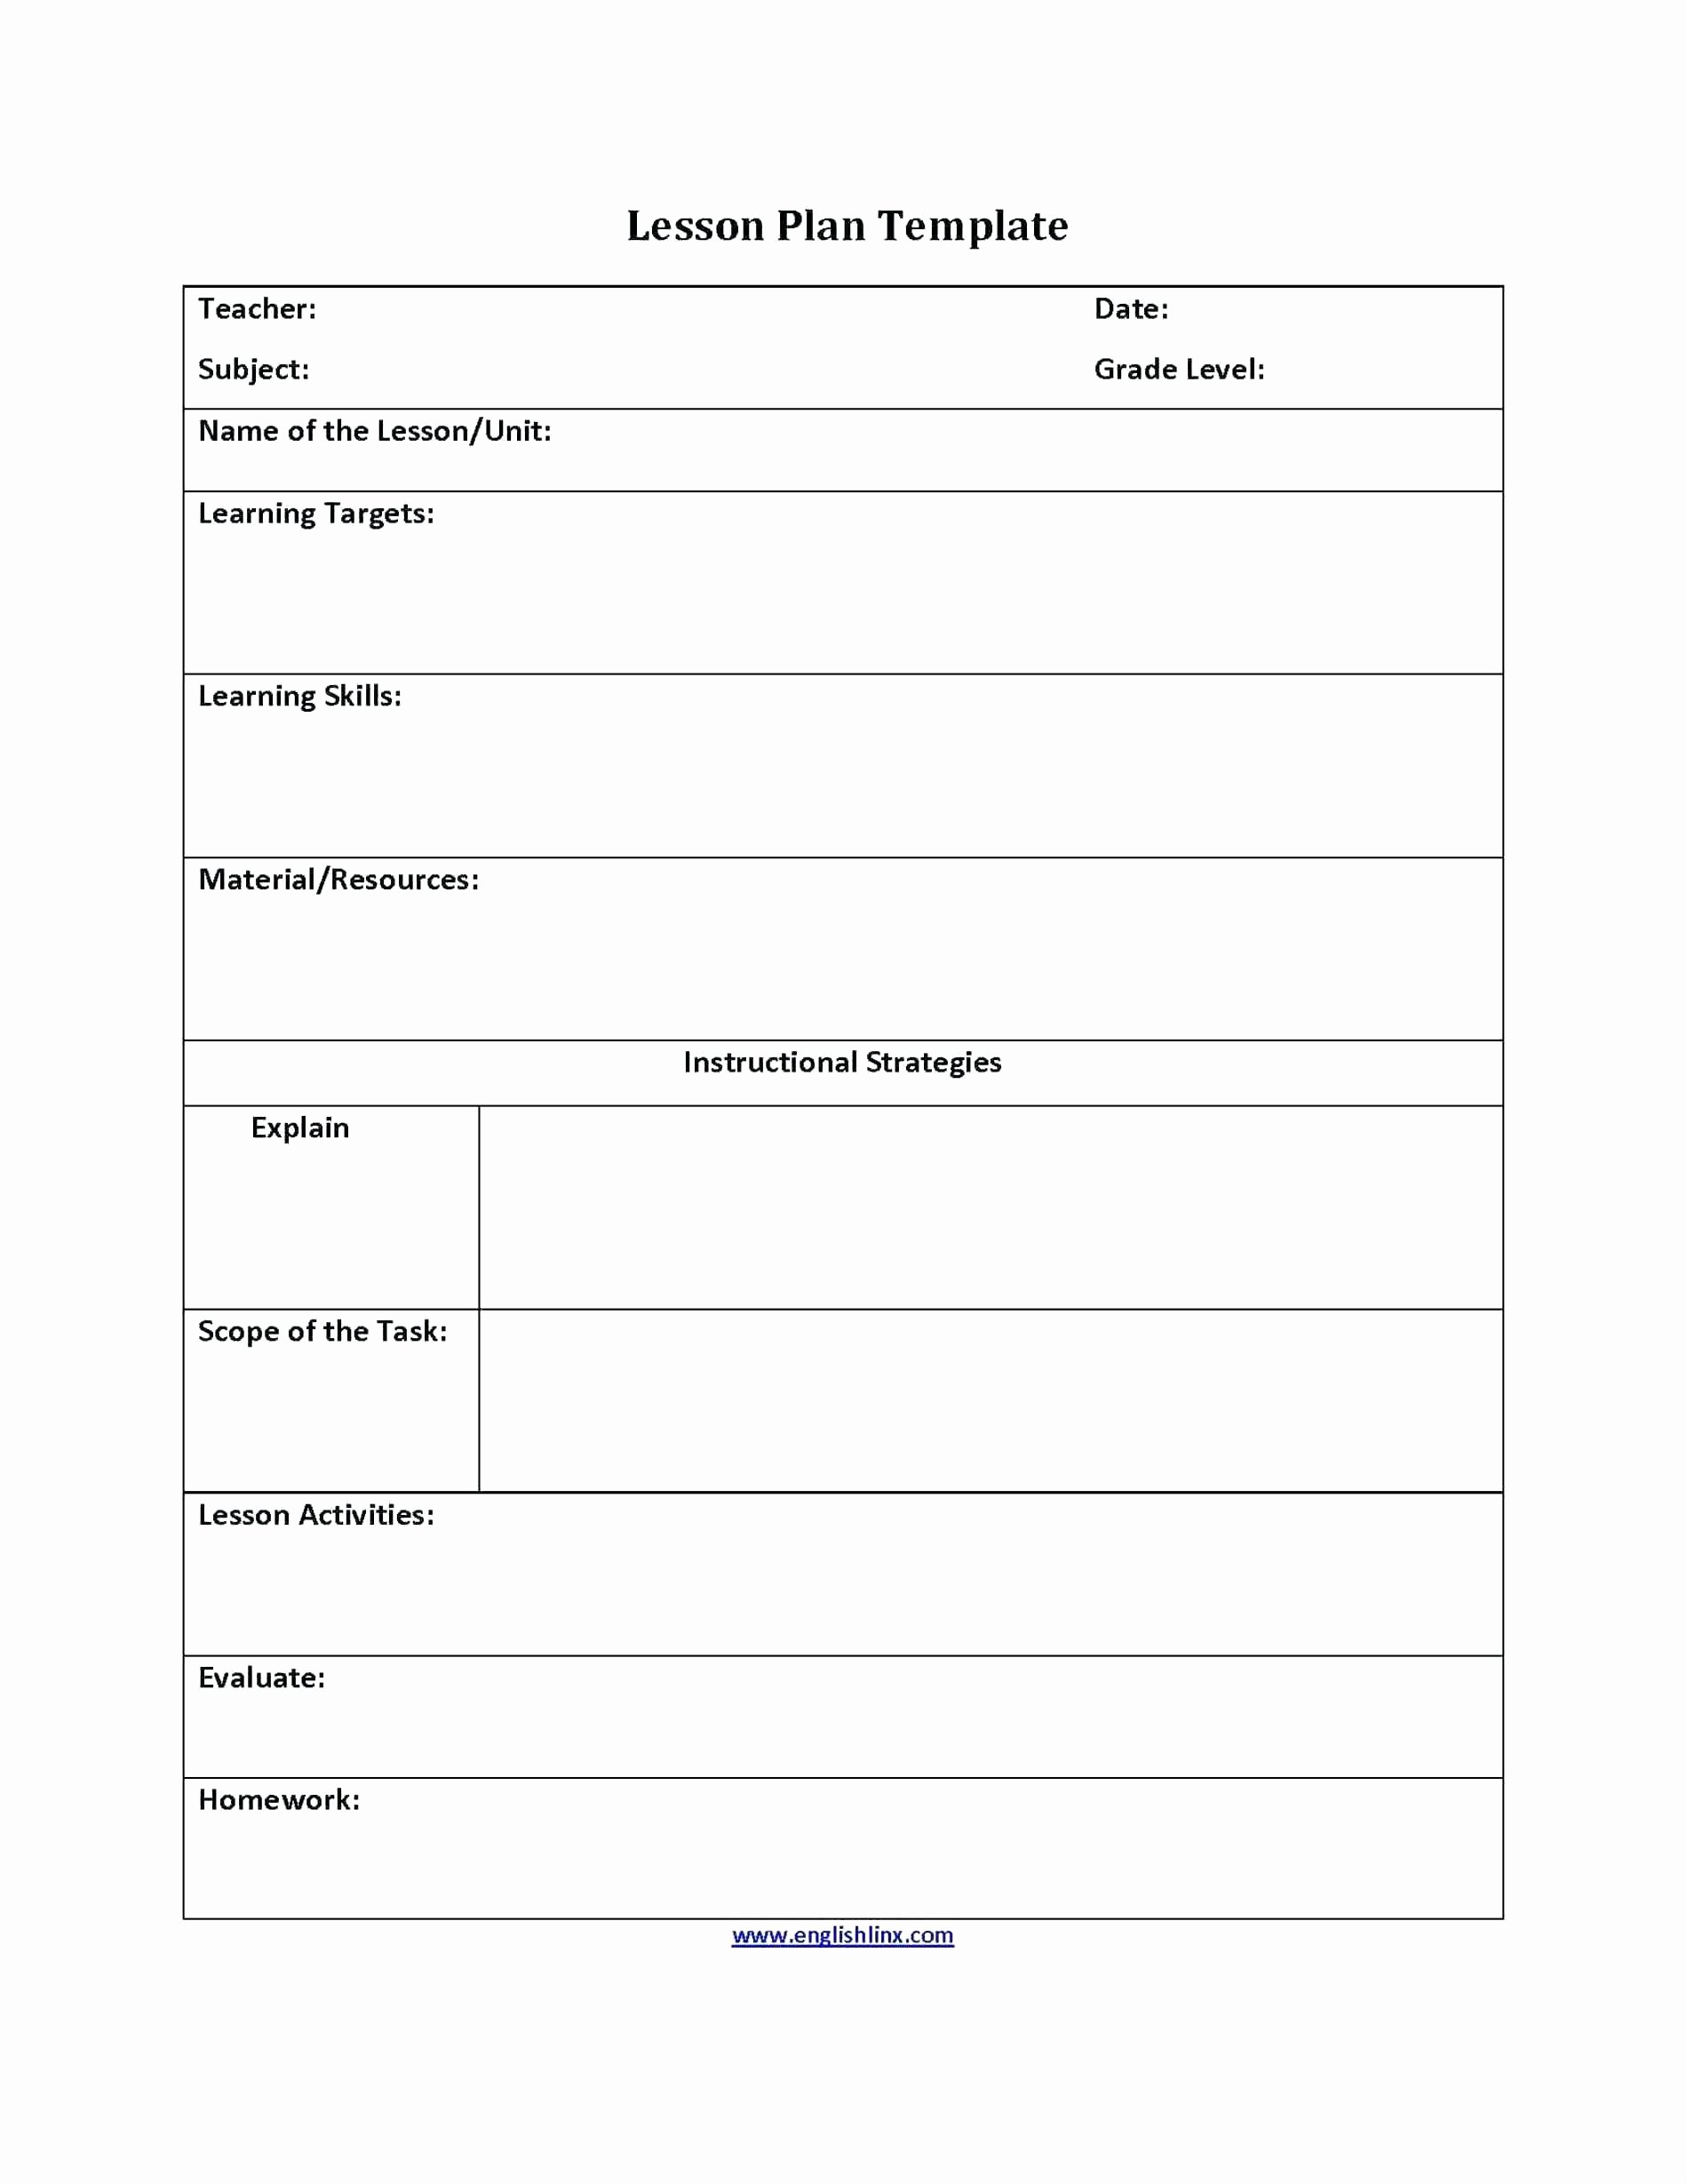 Siop Lesson Plan Template 3 Inspirational Siop Lesson Plan Examples First Grade Full Size Lesson